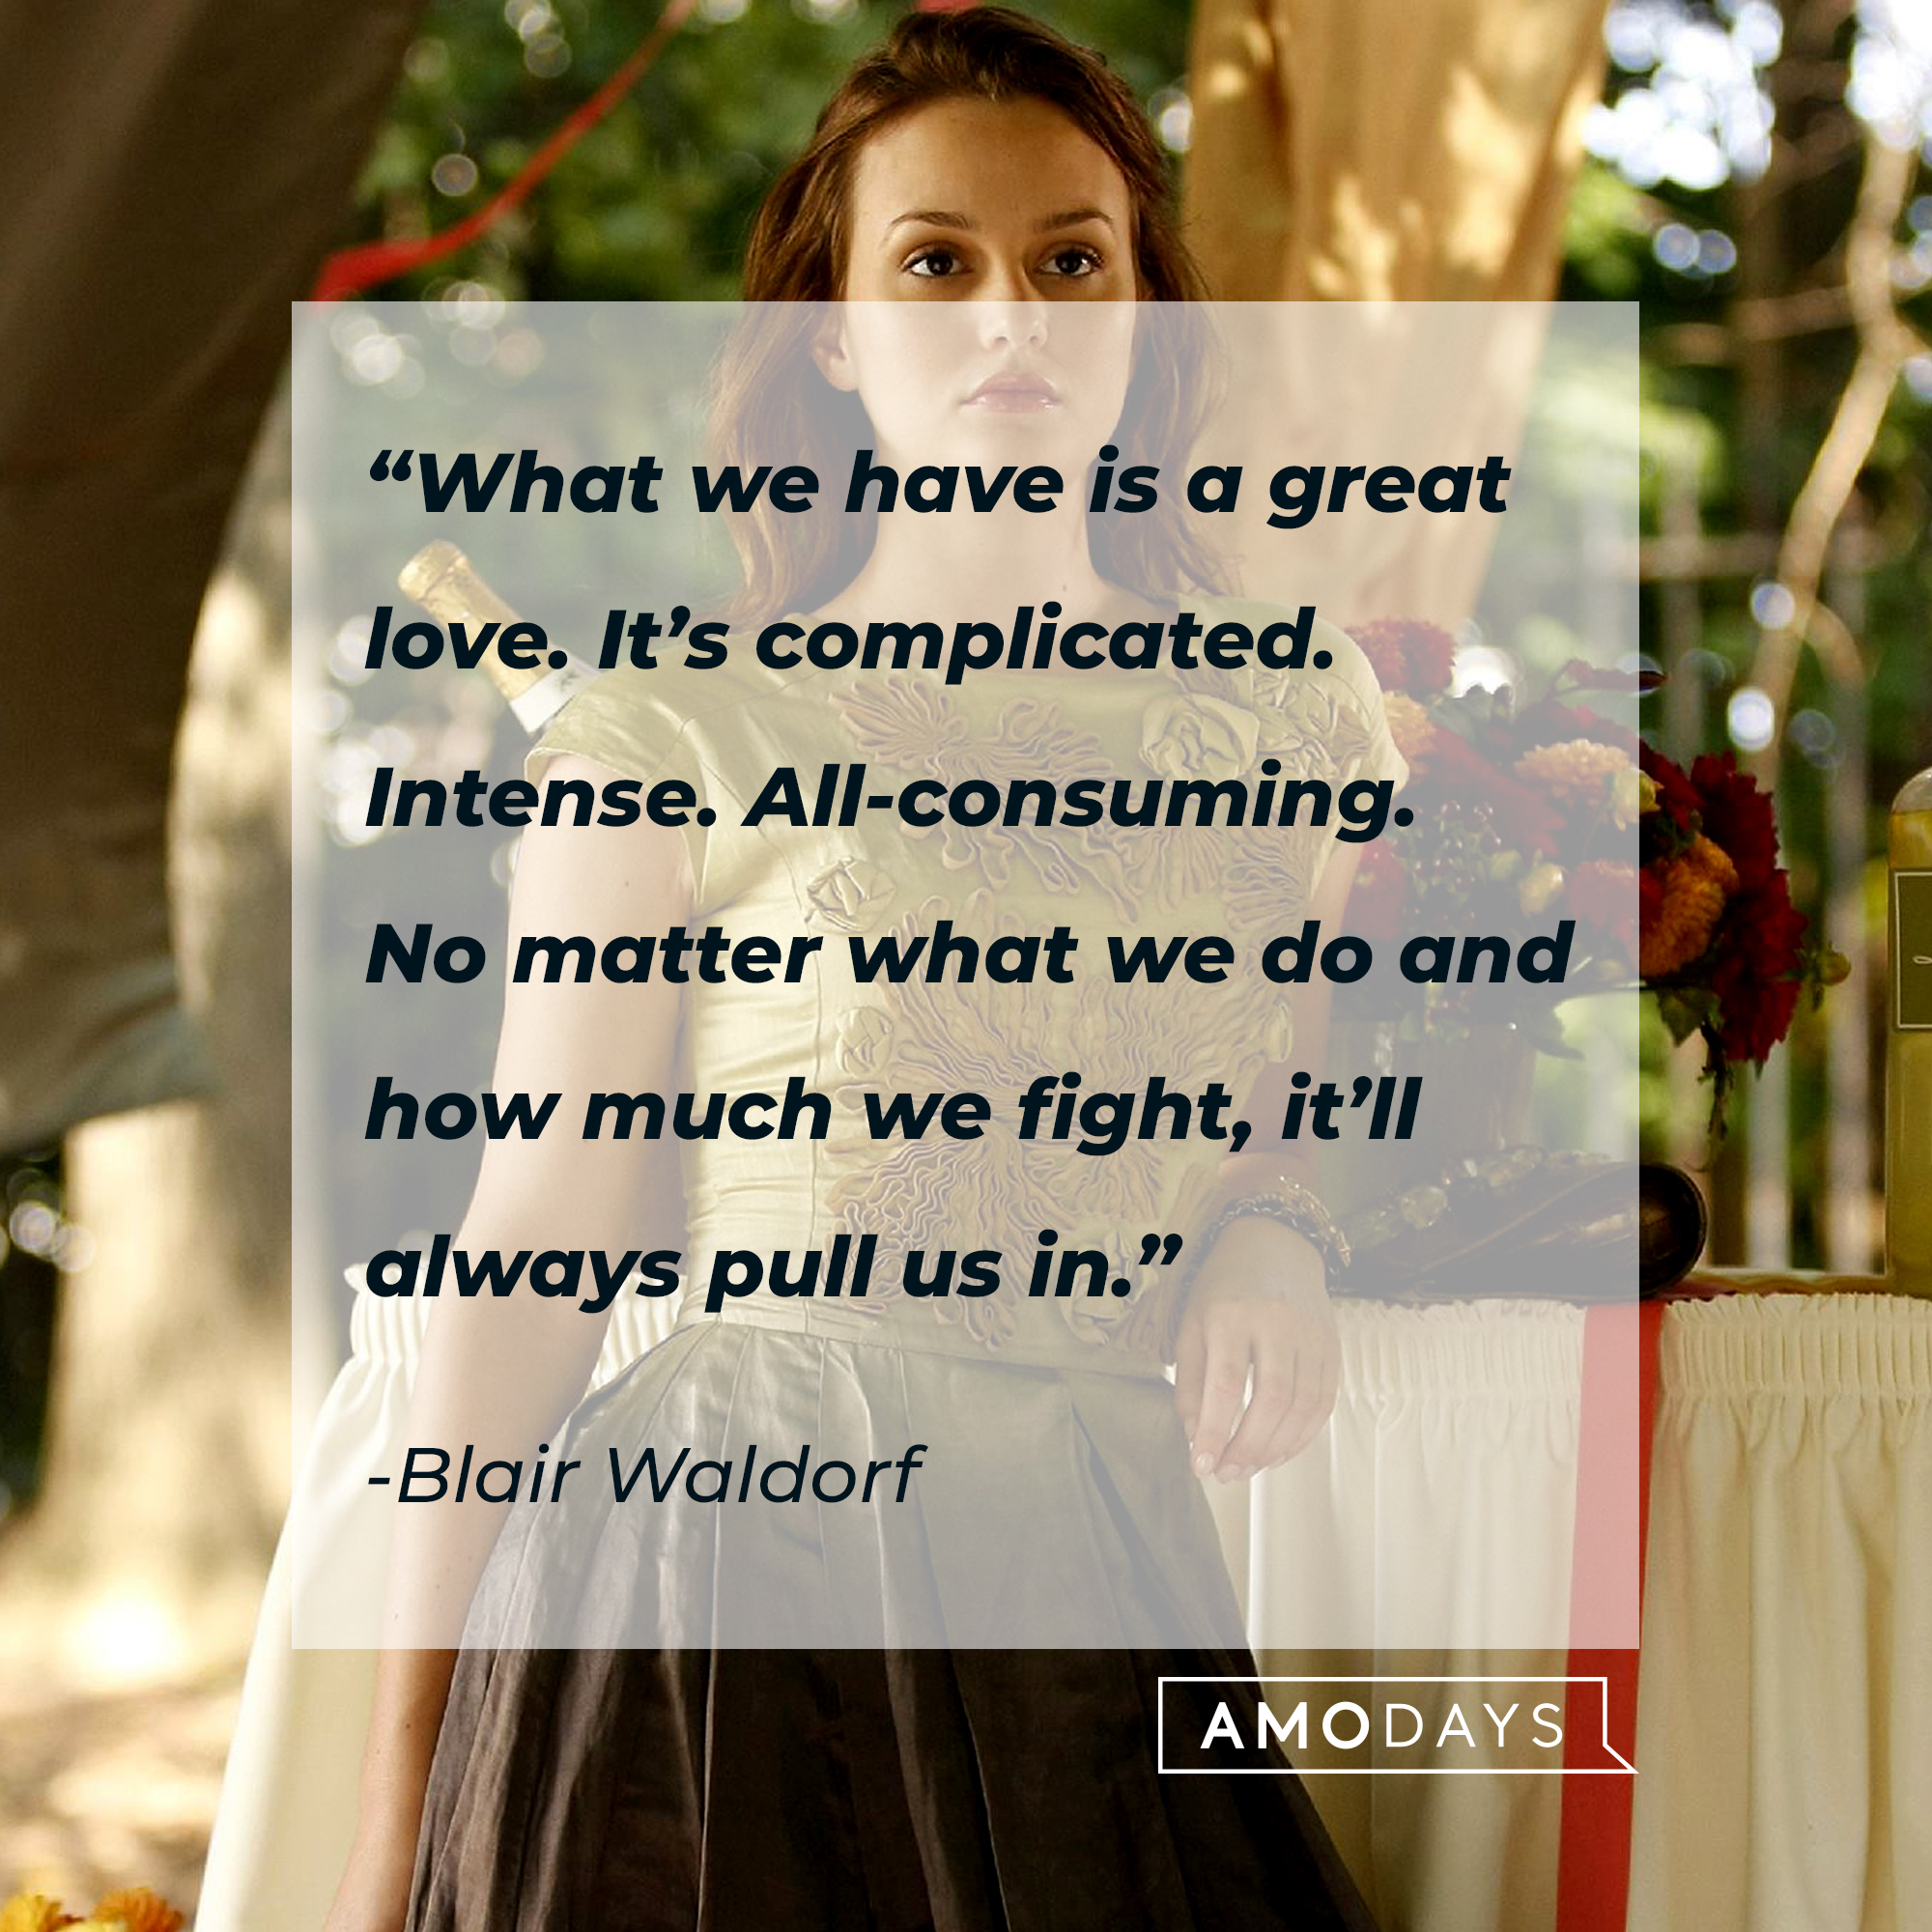 Blair Waldorf from "Gossip Girl" with her quote: “What we have is a great love. It’s complicated. Intense. All-consuming. No matter what we do and how much we fight, it’ll always pull us in.” | Source: Facebook.com/GossipGirl